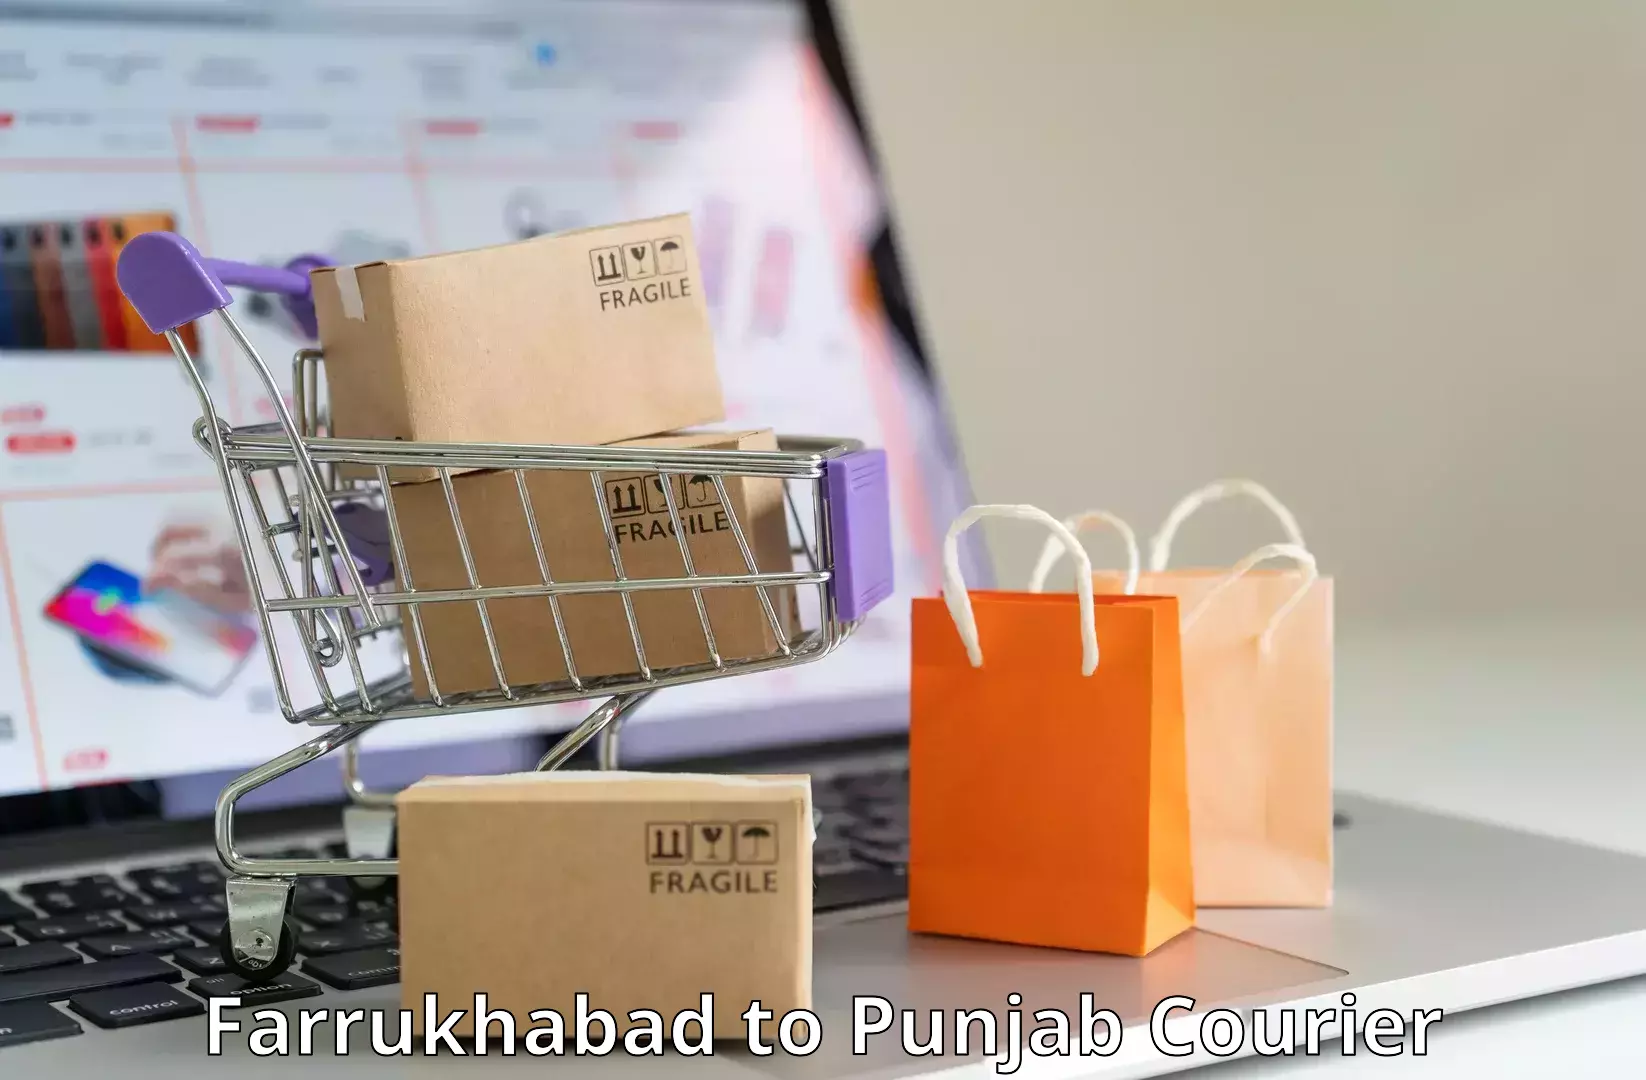 Professional delivery solutions Farrukhabad to Amritsar